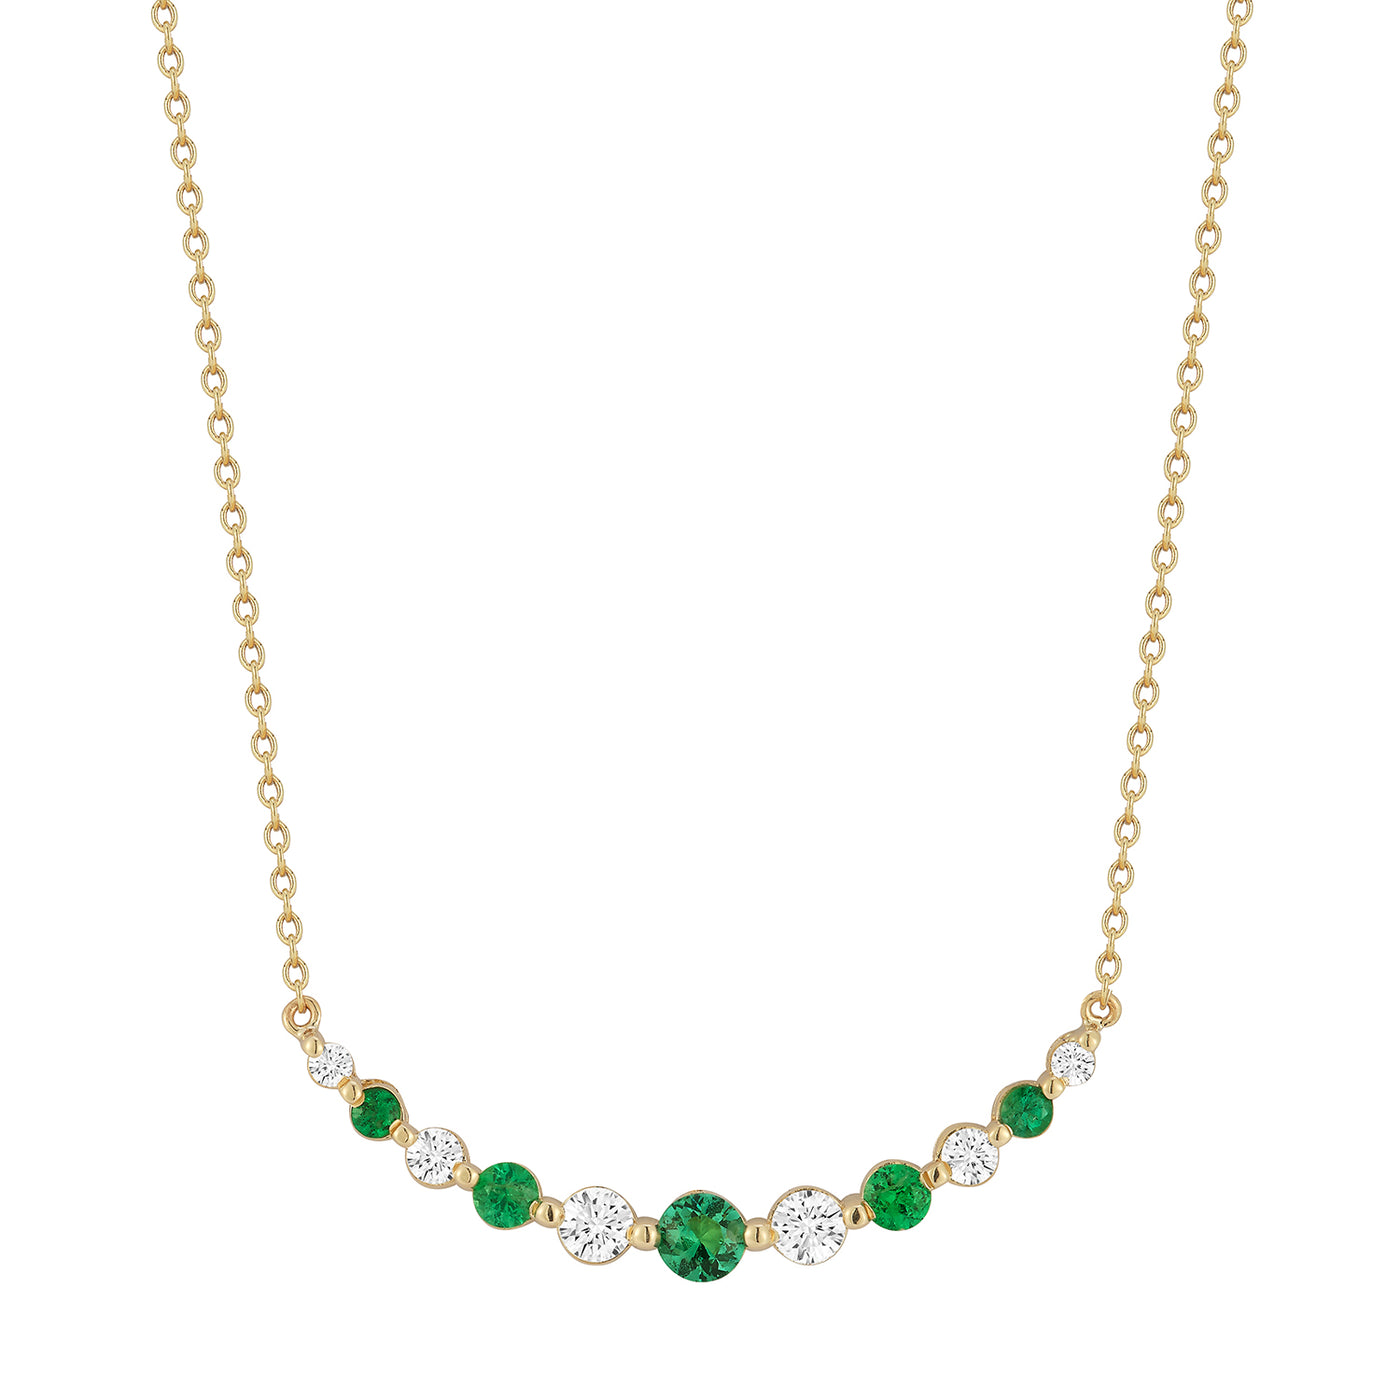 DA Gold 14k Yellow Gold Emerald and Diamond Bar Necklace – N3101/YED